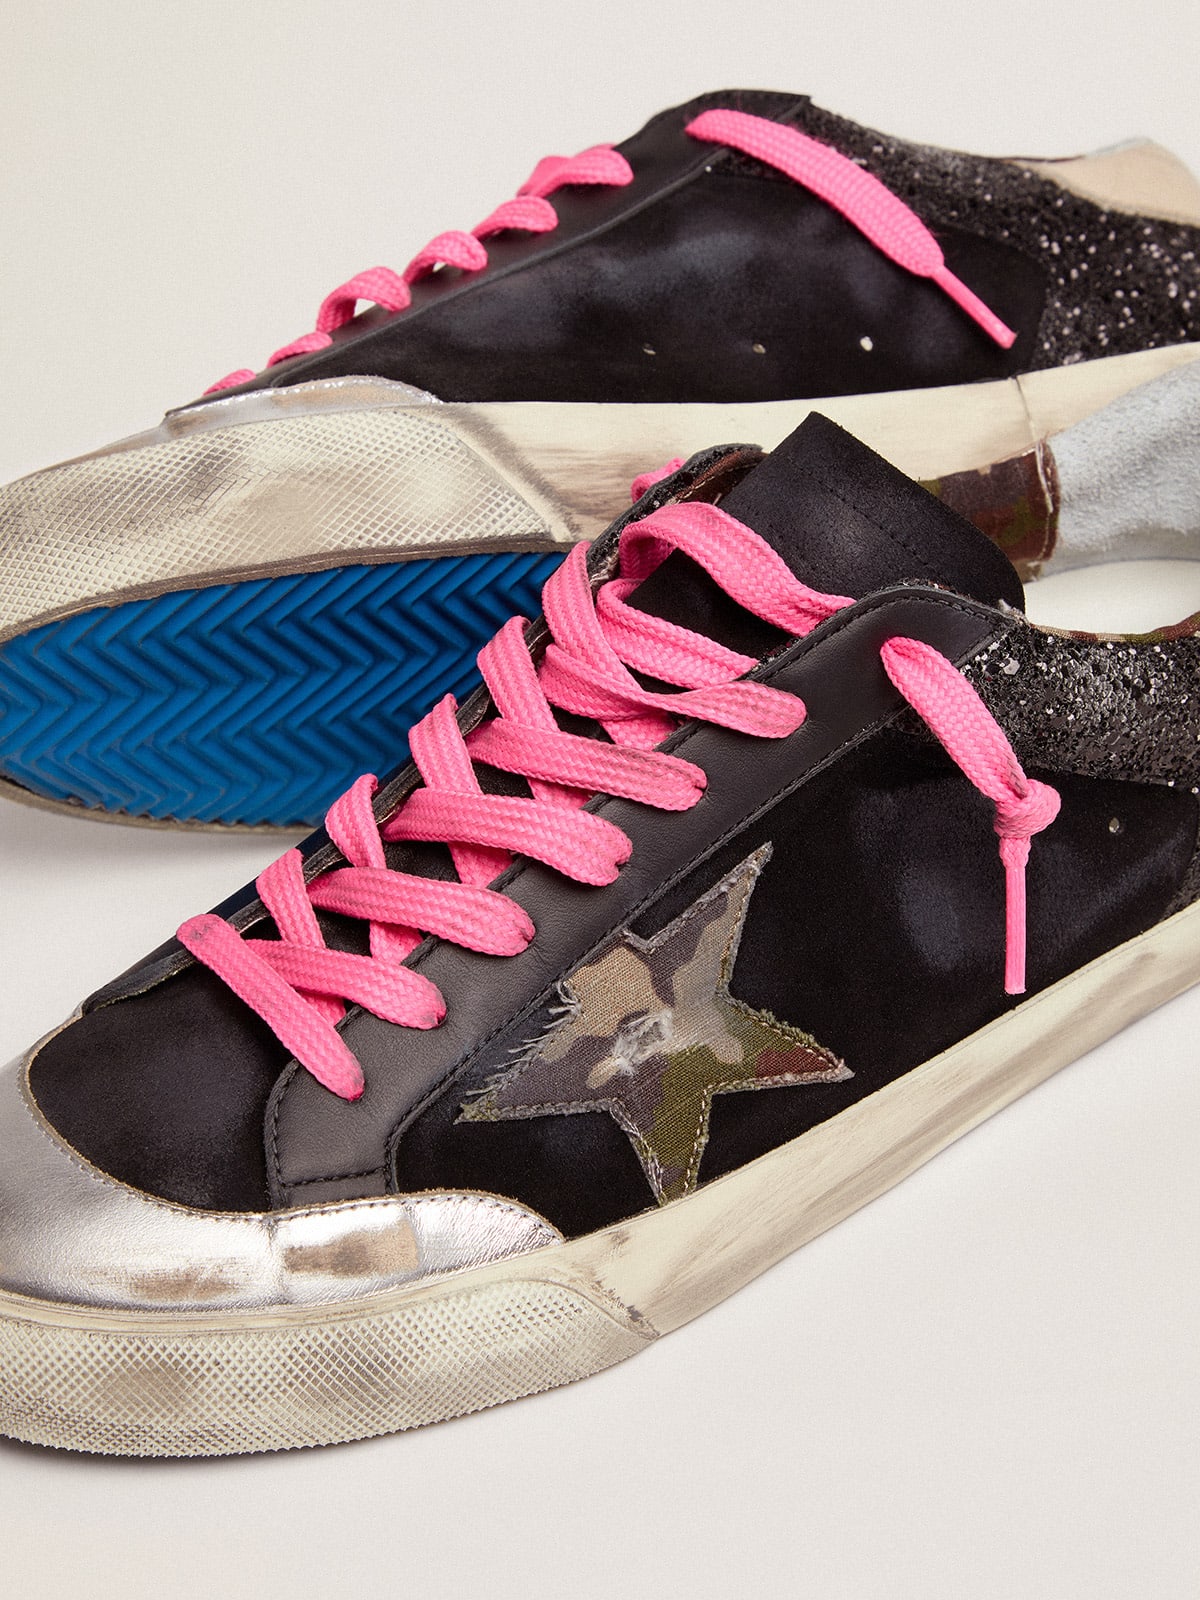 Golden Goose - Super-Star sneakers in black glitter and suede with camouflage fabric star in 